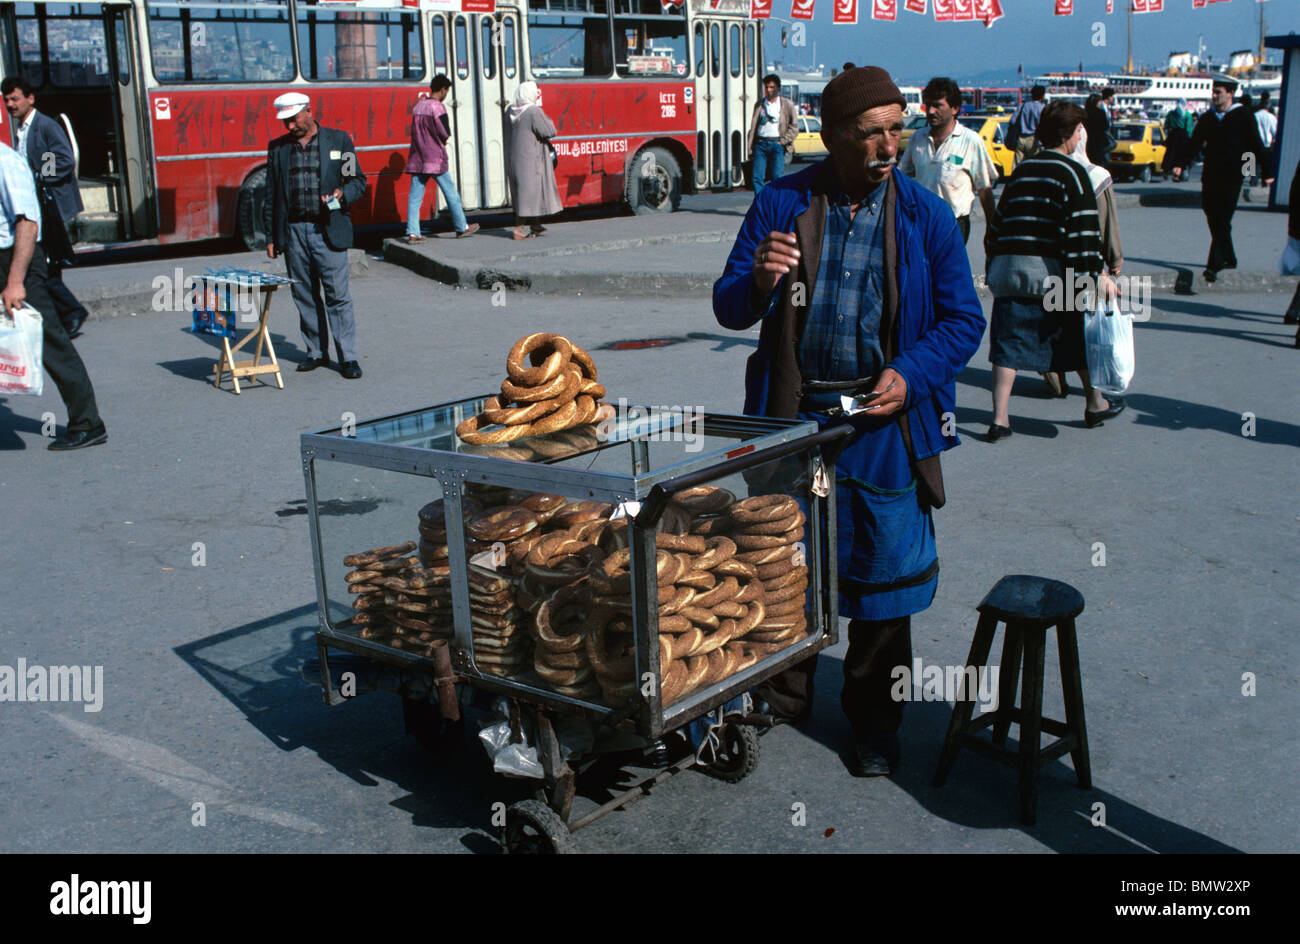 Simit Seller, Street Hawker or Vendor Selling Rolls of Sesame Bread, known as Simit, Beyazit, Istanbul, Turkey Stock Photo